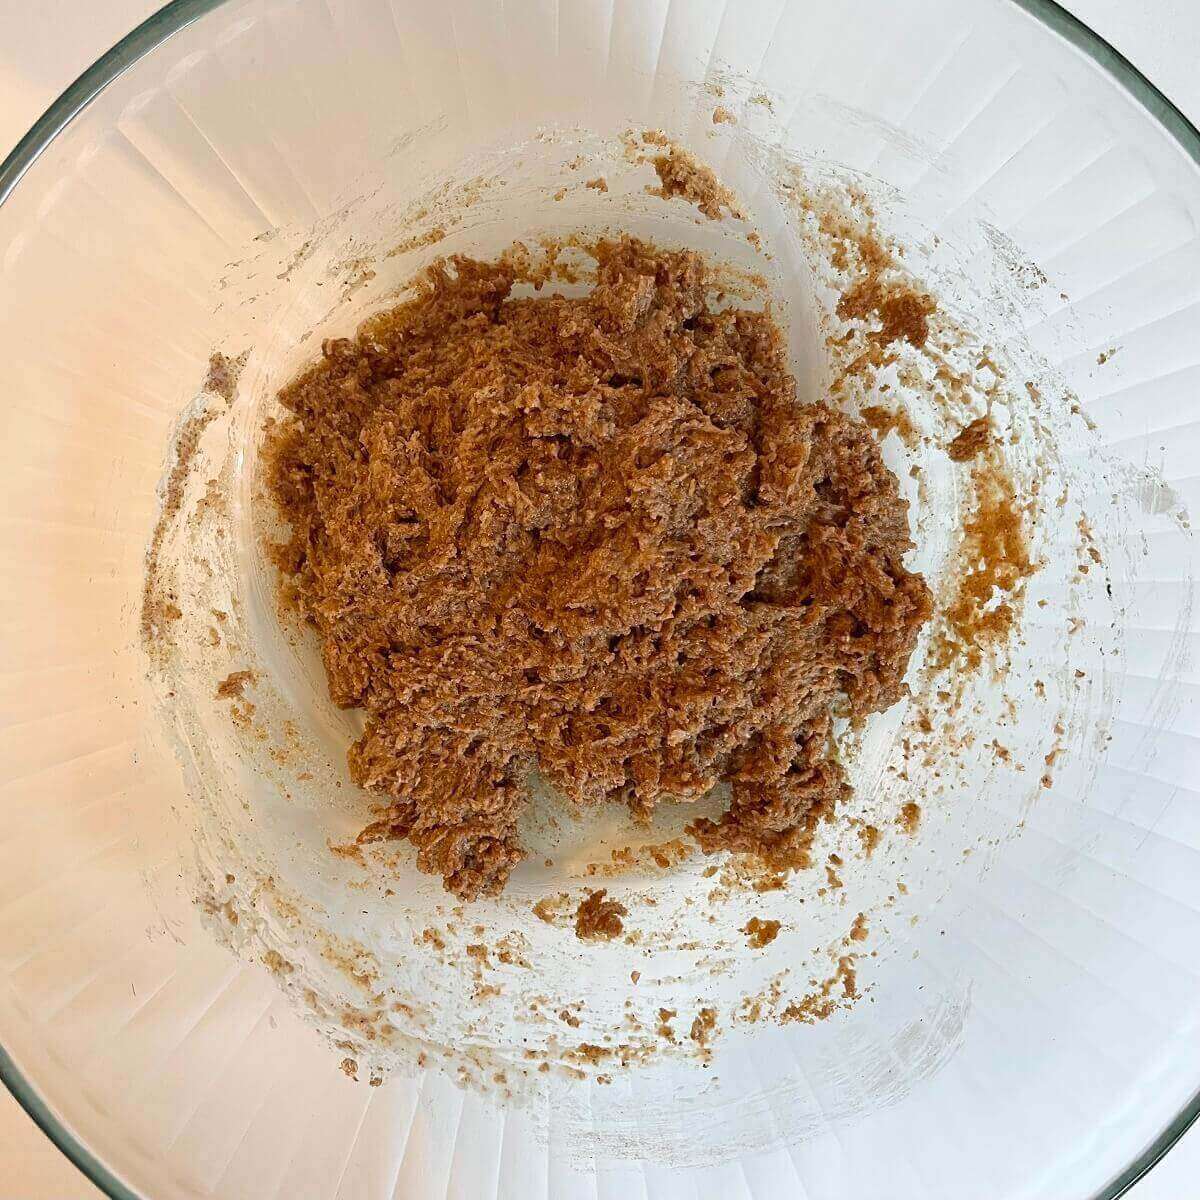 Almond butter dough in a large glass mixing bowl.